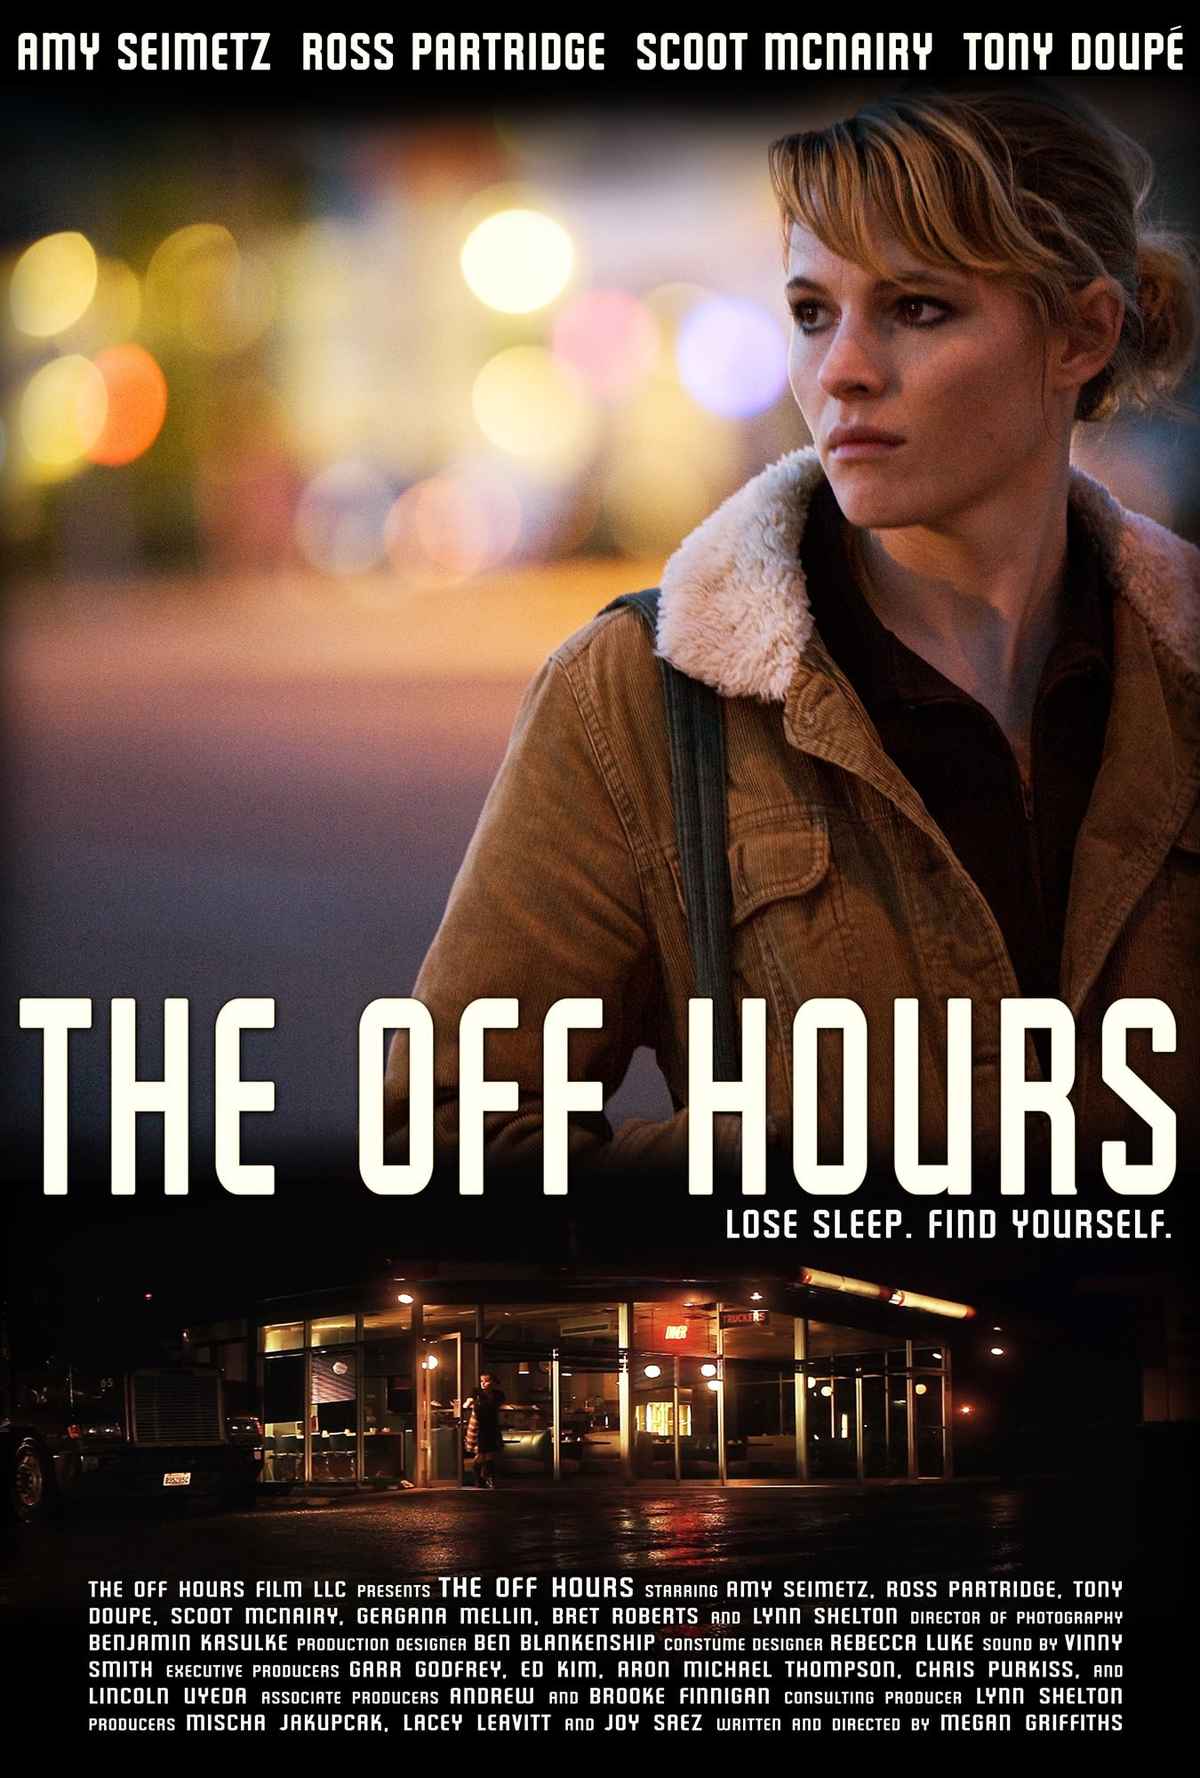 The Off Hours